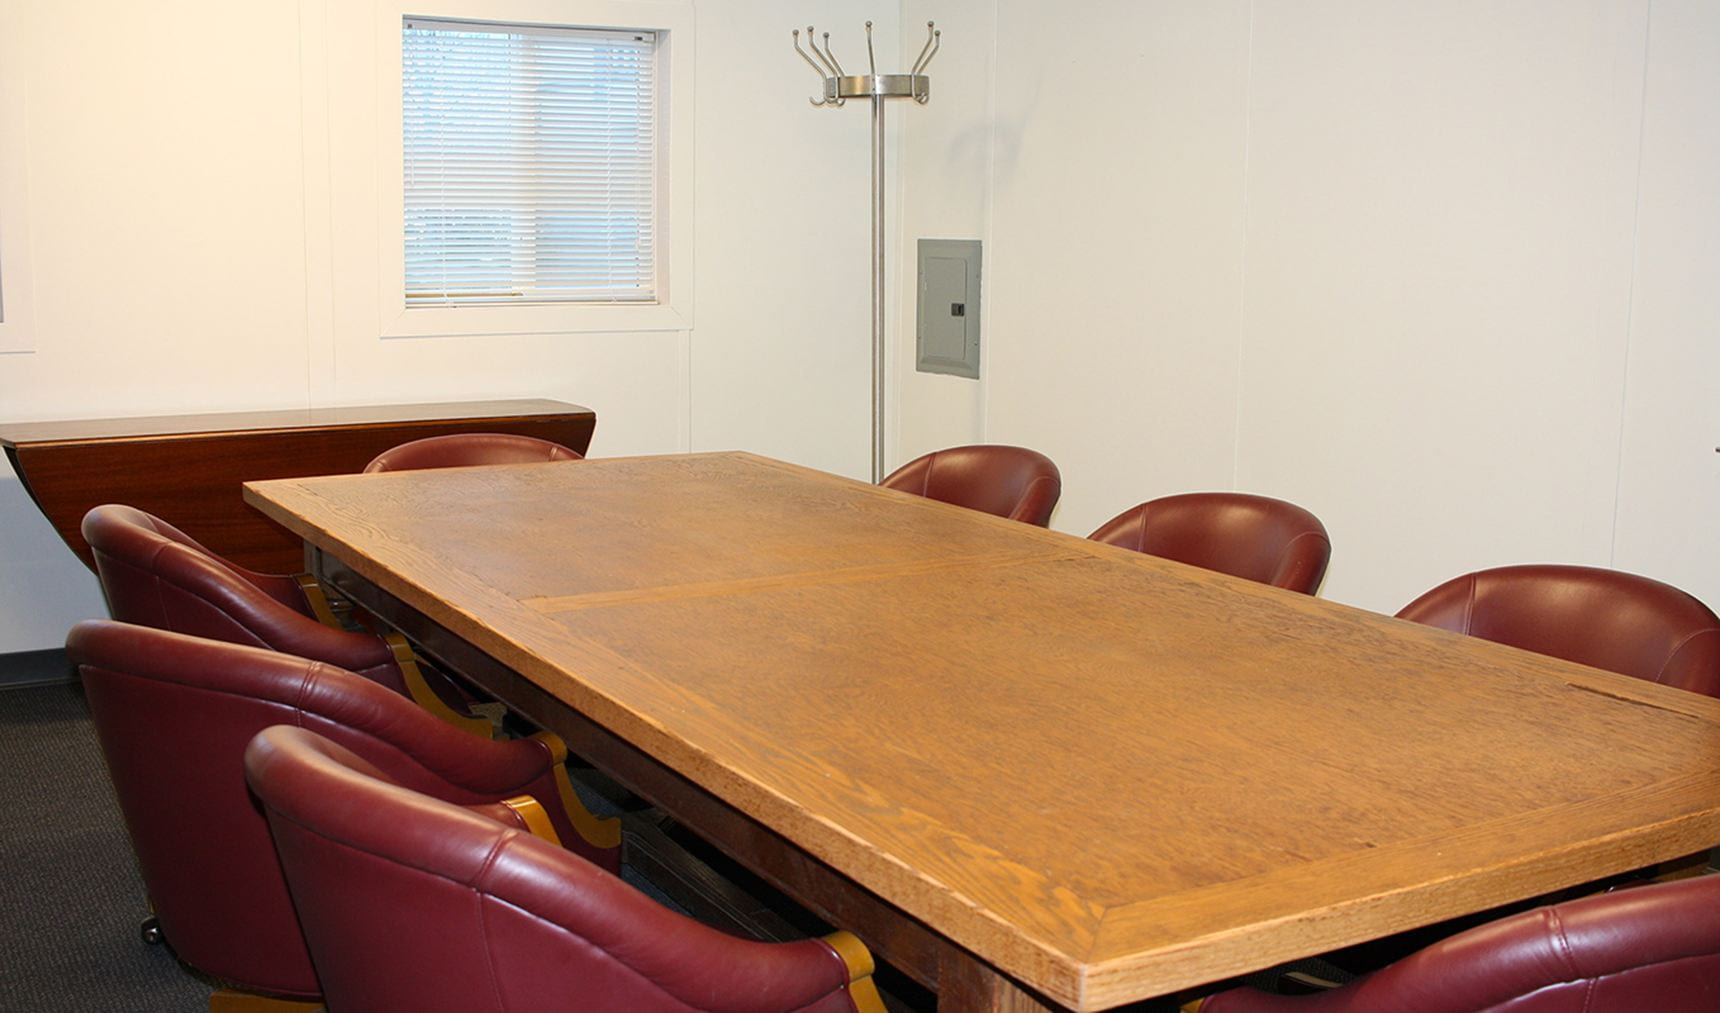 Boardroom Table at UChicago with red leather chairs